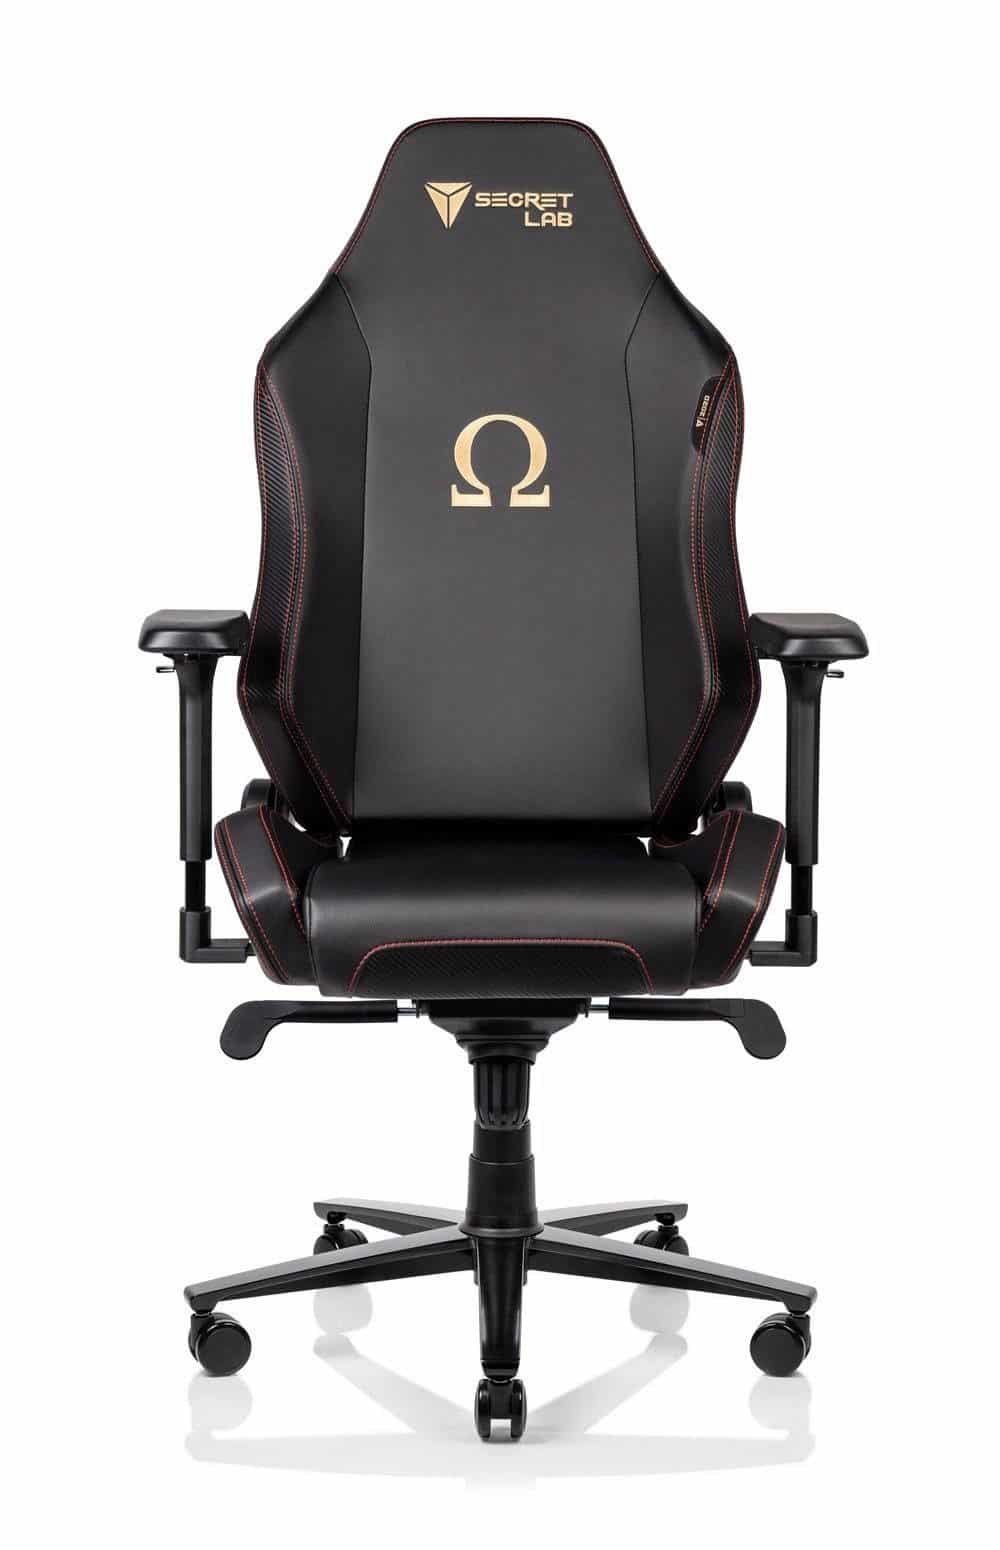 Secret Lab Omega Gaming Chair Unbiased Review 2021